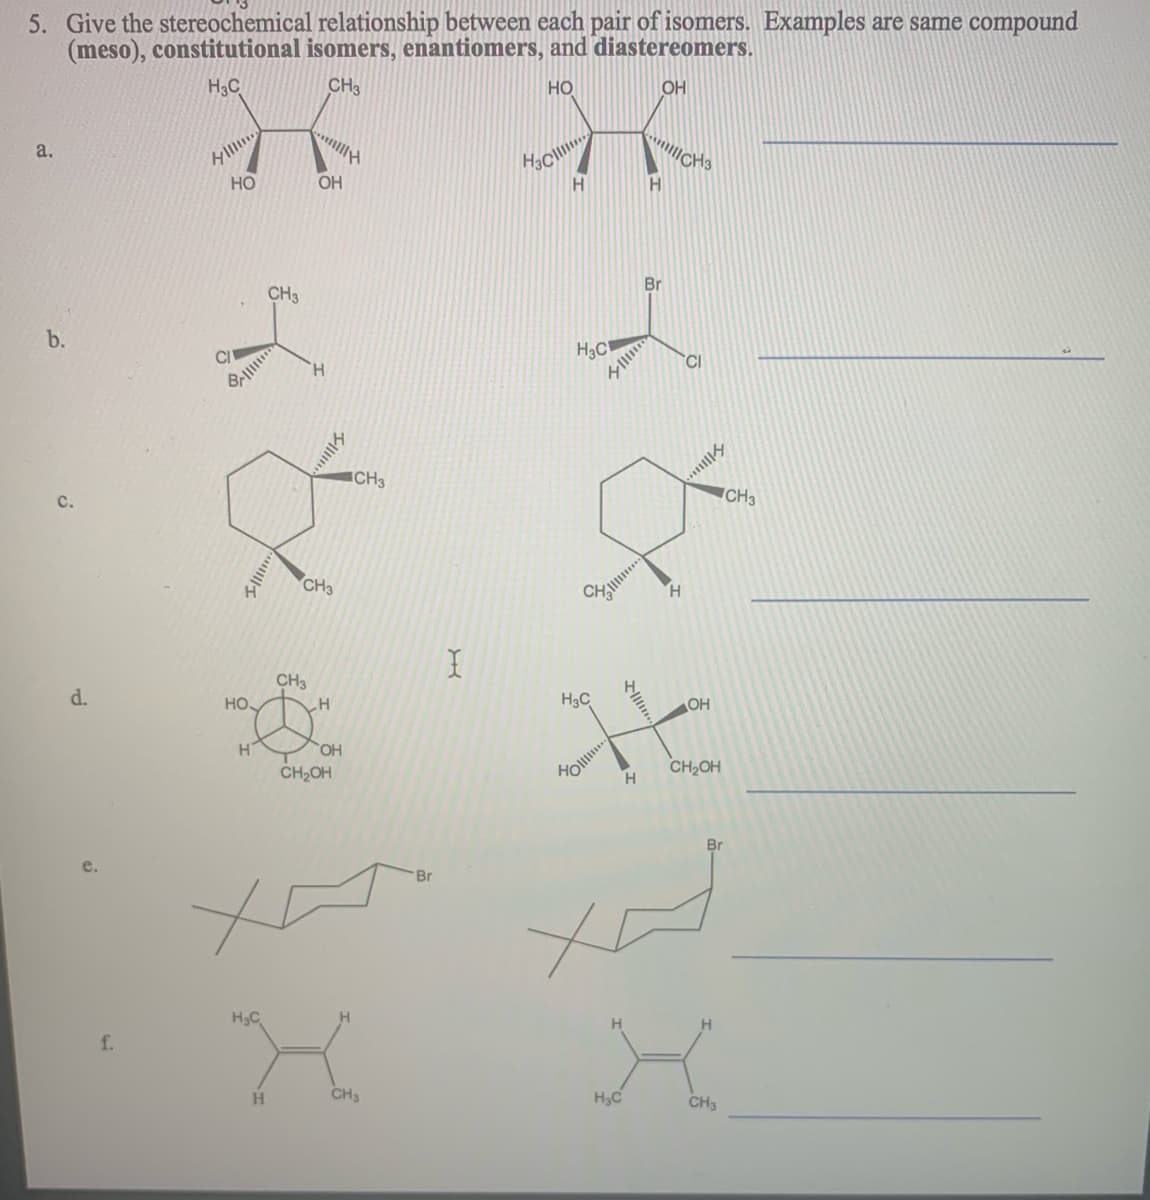 5. Give the stereochemical relationship between each pair of isomers. Examples are same compound
(meso), constitutional isomers, enantiomers, and diastereomers.
H3C
CH3
HO
OH
lll
a.
Но
OH
H
Br
CH3
b.
C/
H3C
CI
H.
ICH3
CH3
с.
CH3
H.
CH3
d.
Но.
H3C
OH
CH2OH
Ho
CH2OH
Br
e.
Br
H3C
f.
H
CH3
H3C
CH3
